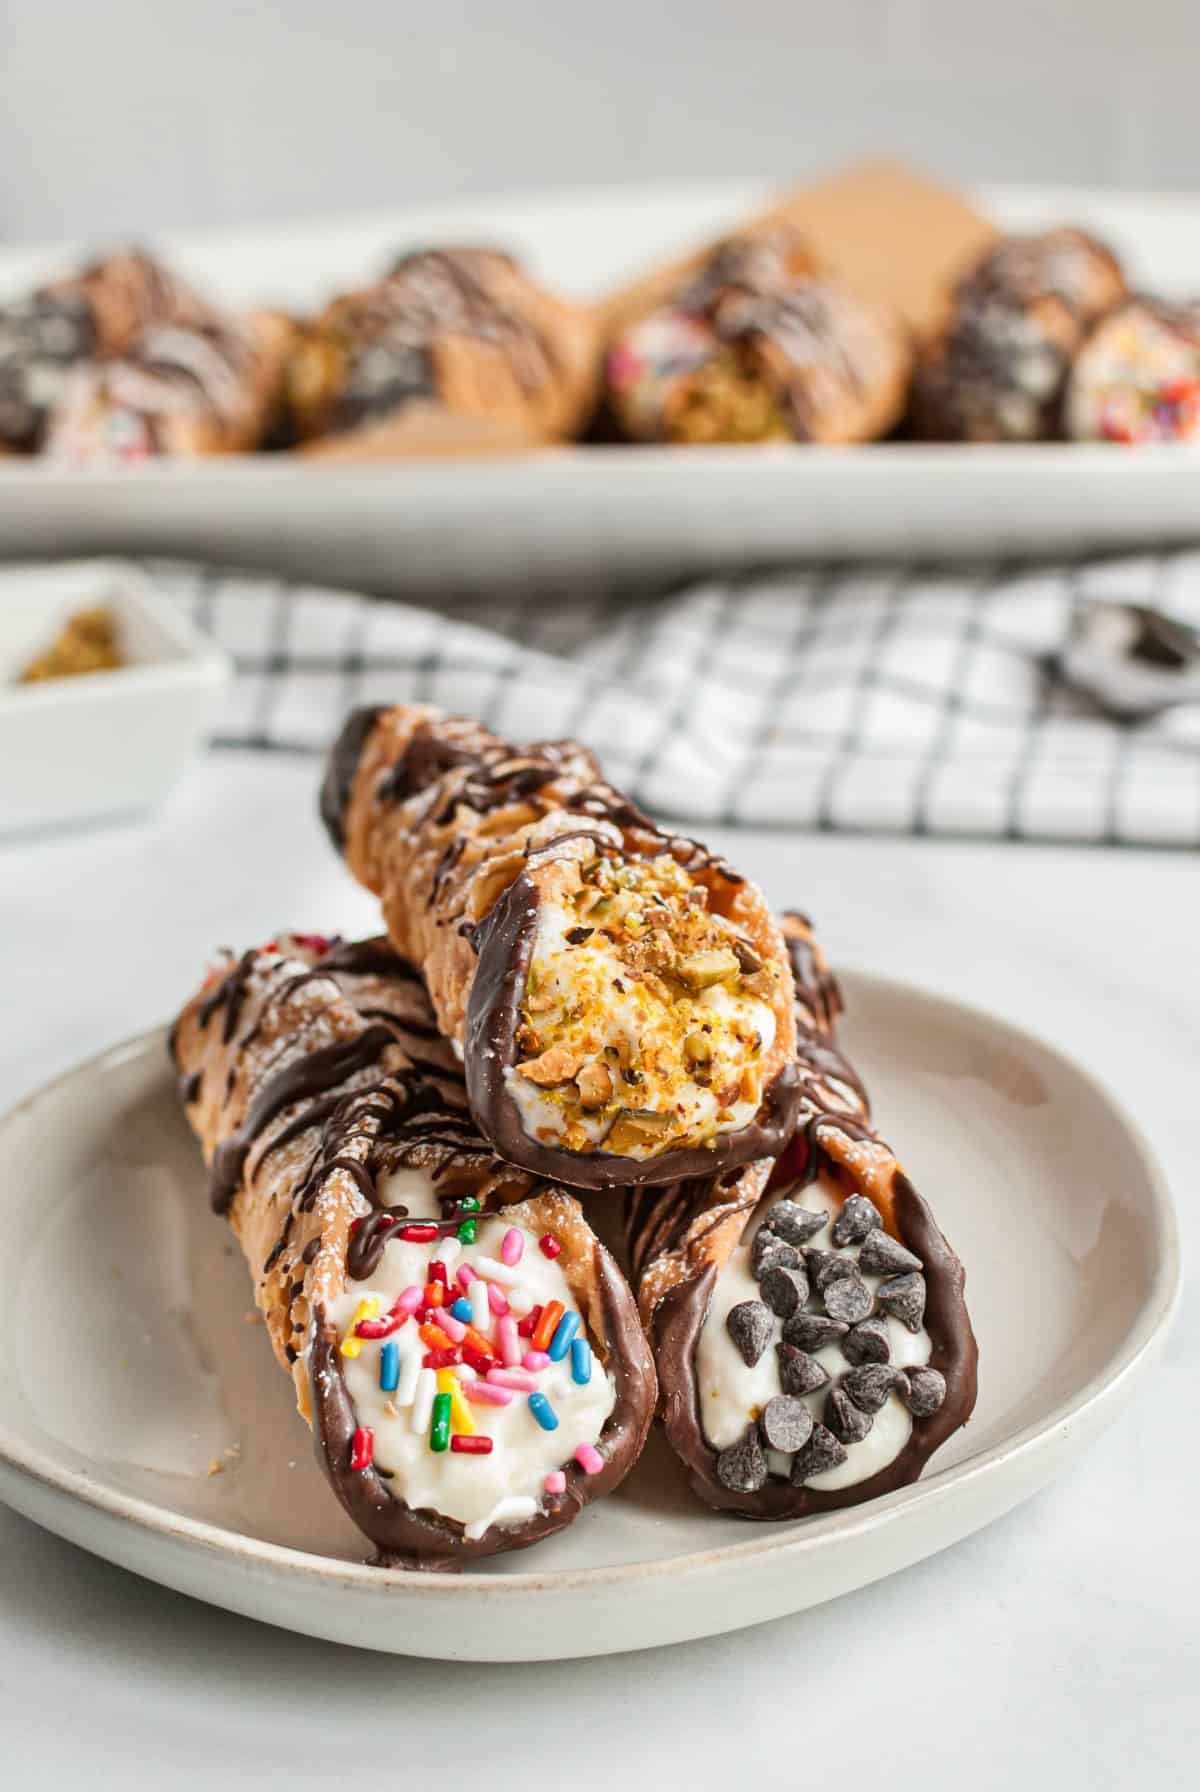 Three cannolis on a white dessert plate, each dipped in either pistachios, chocolate chips, or sprinkles.